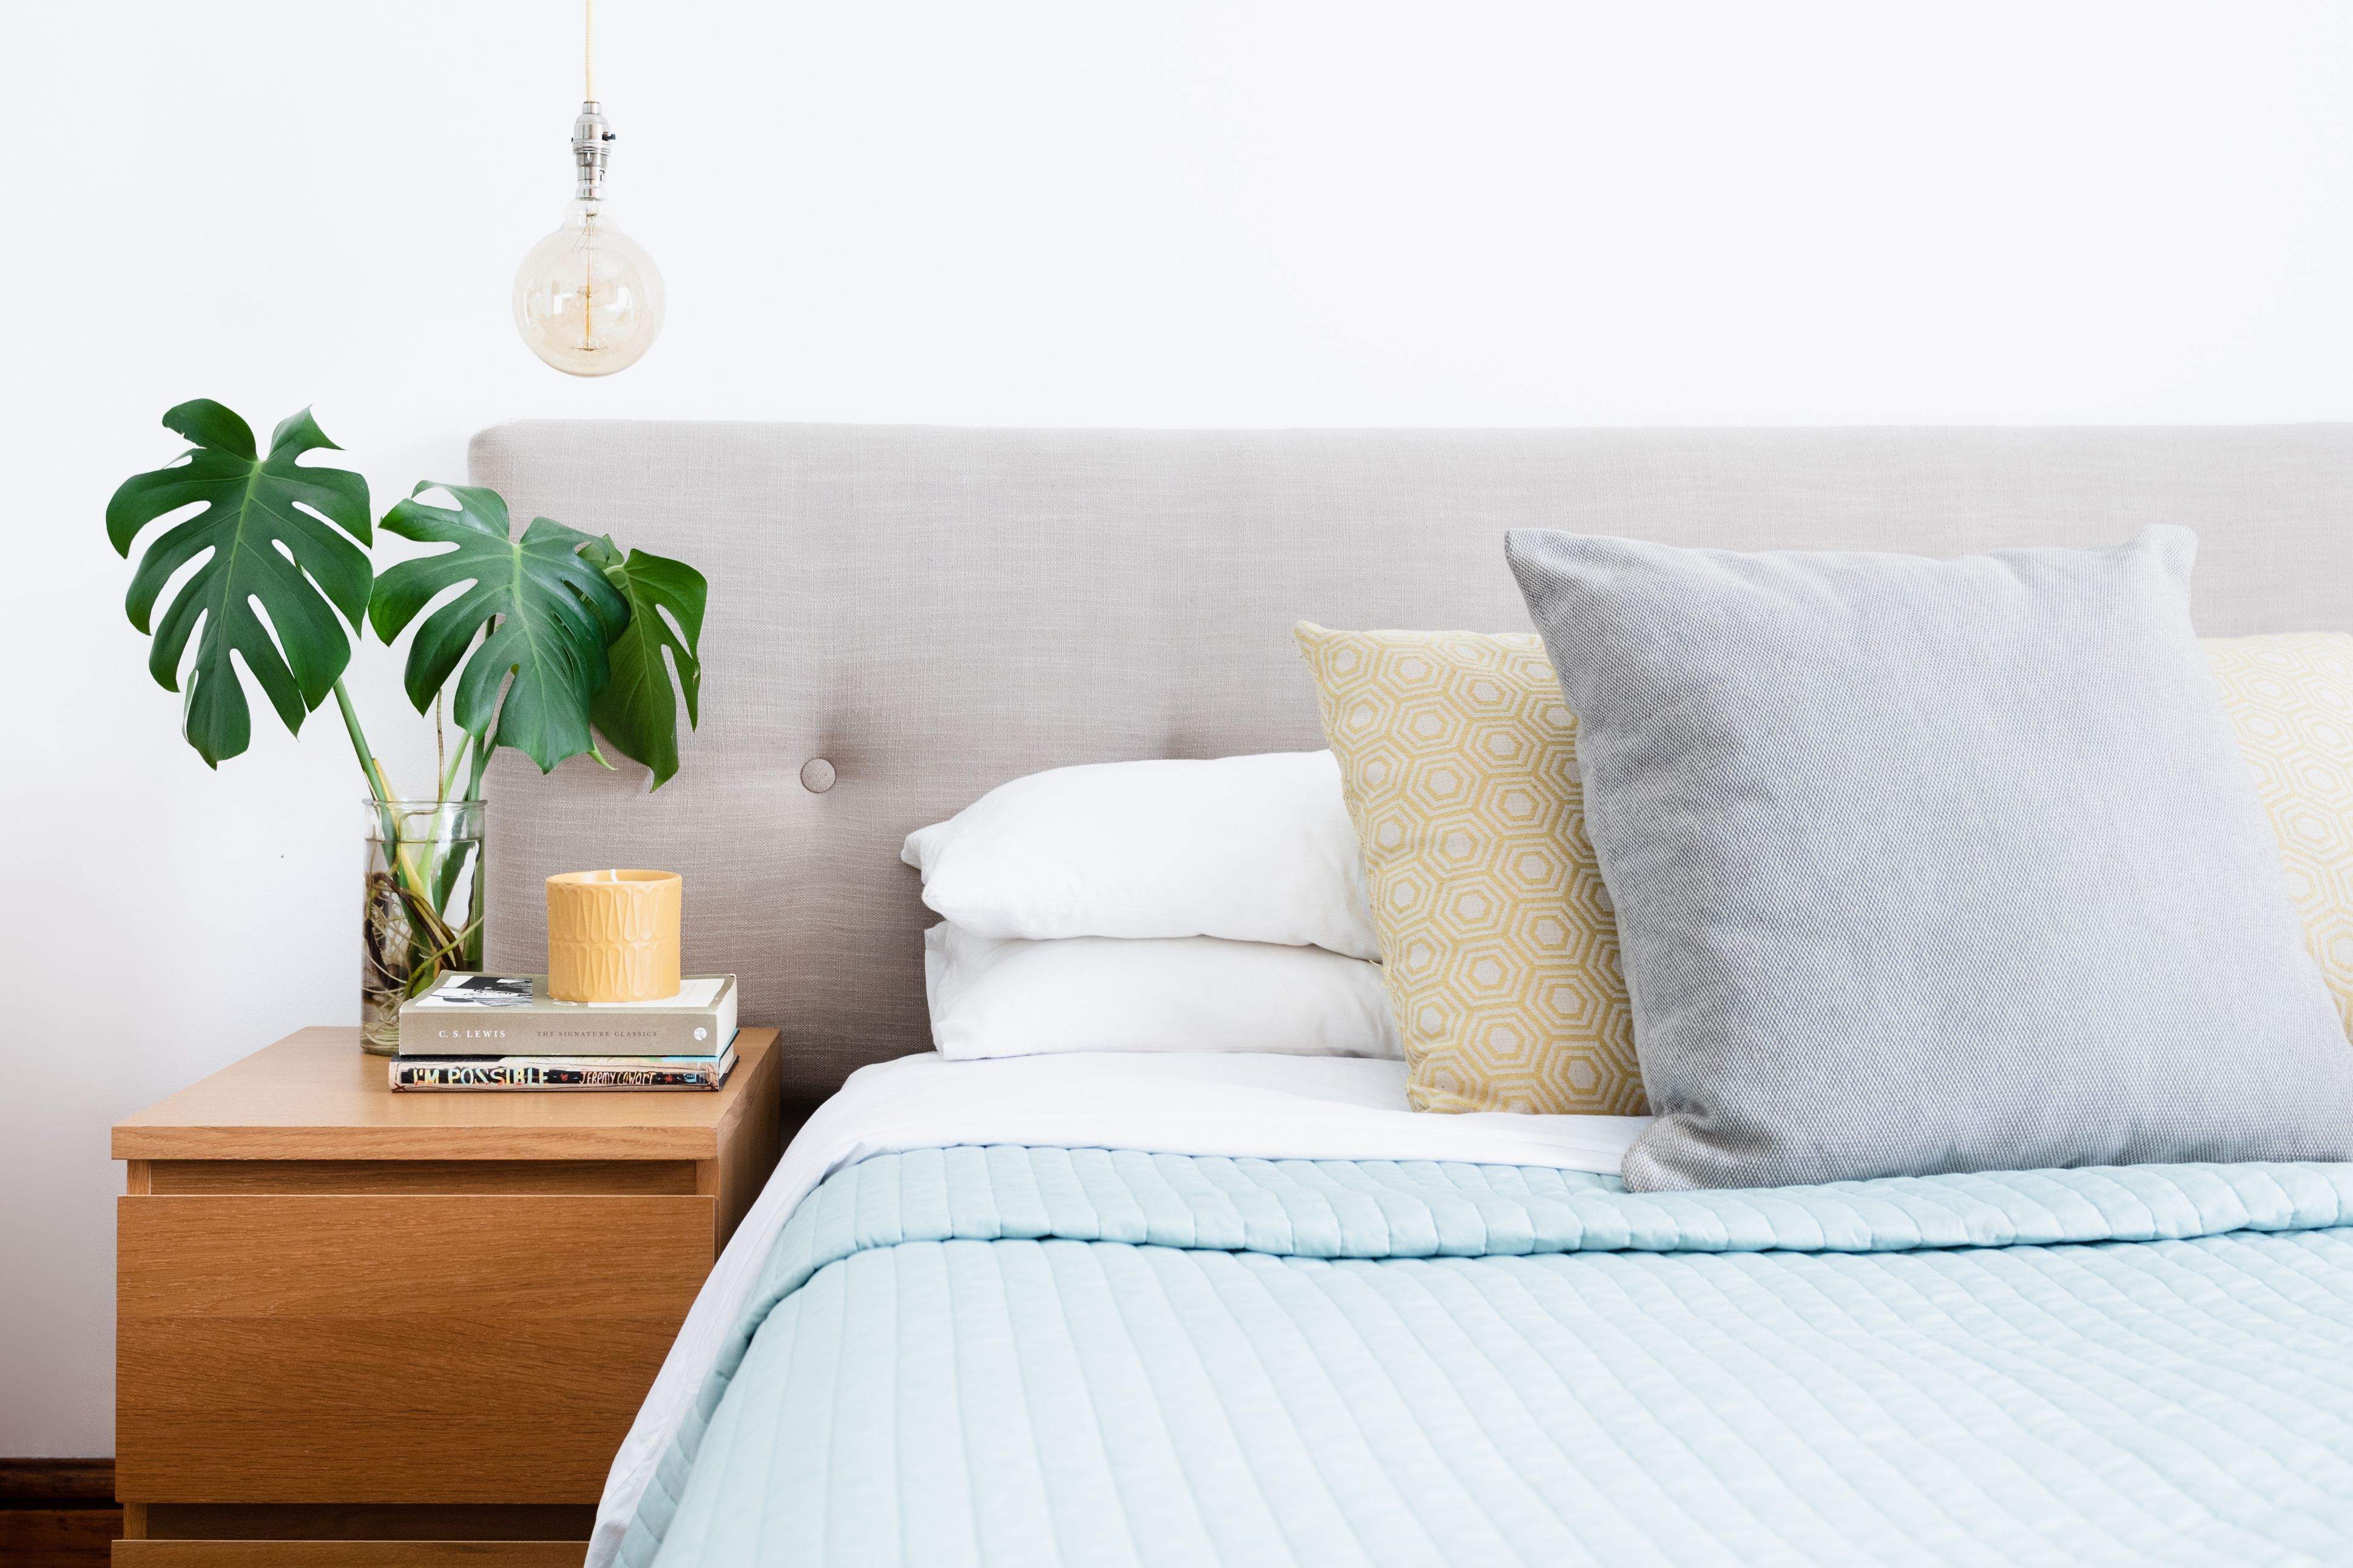 5 Great Reasons to Make Your Bed Every Day